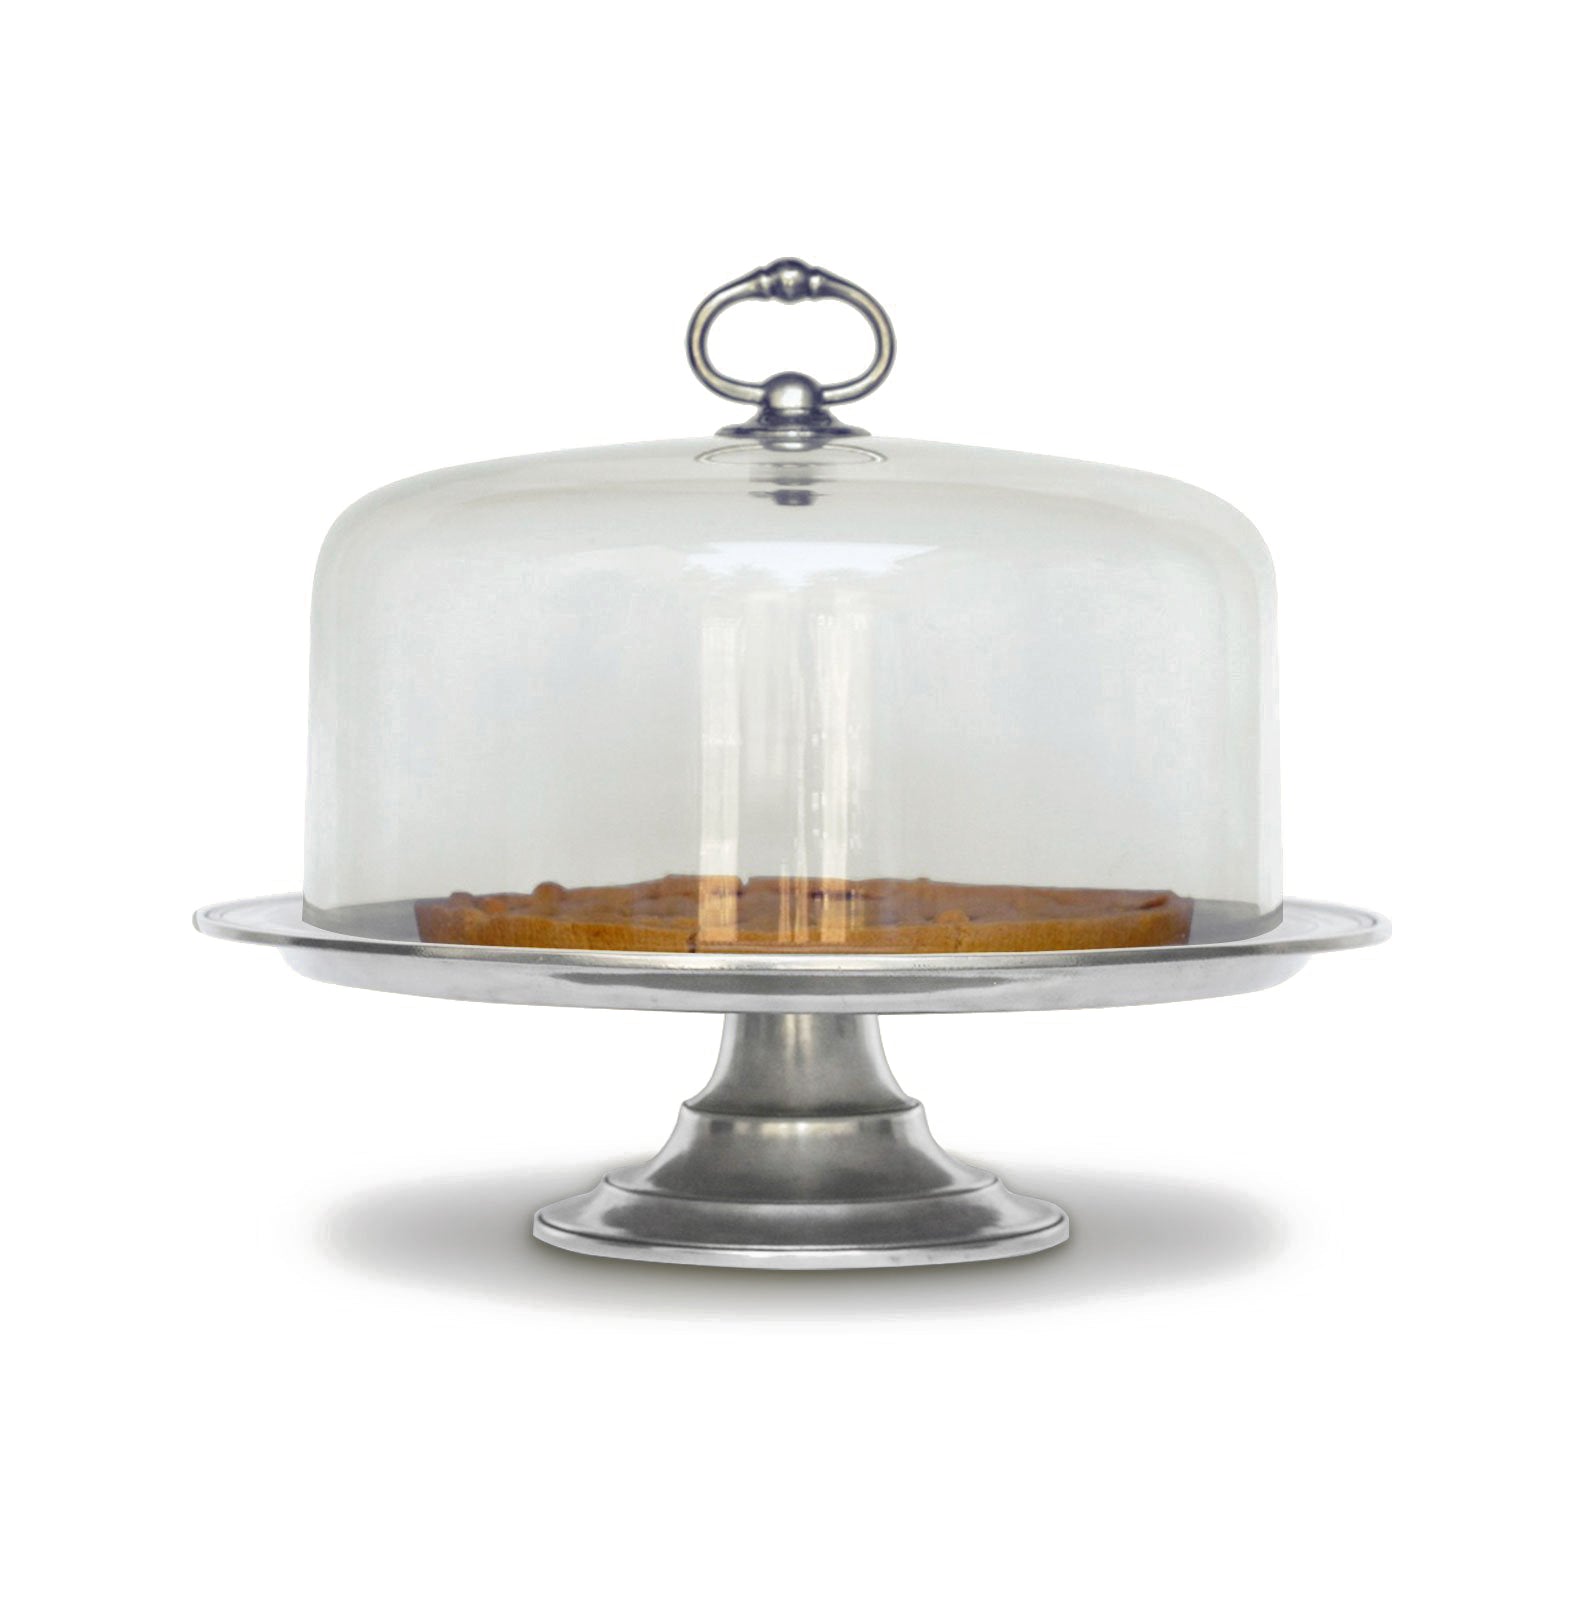 Glass Cloche Dome with Pewter Ring Handle - Timothy De Clue Collection 